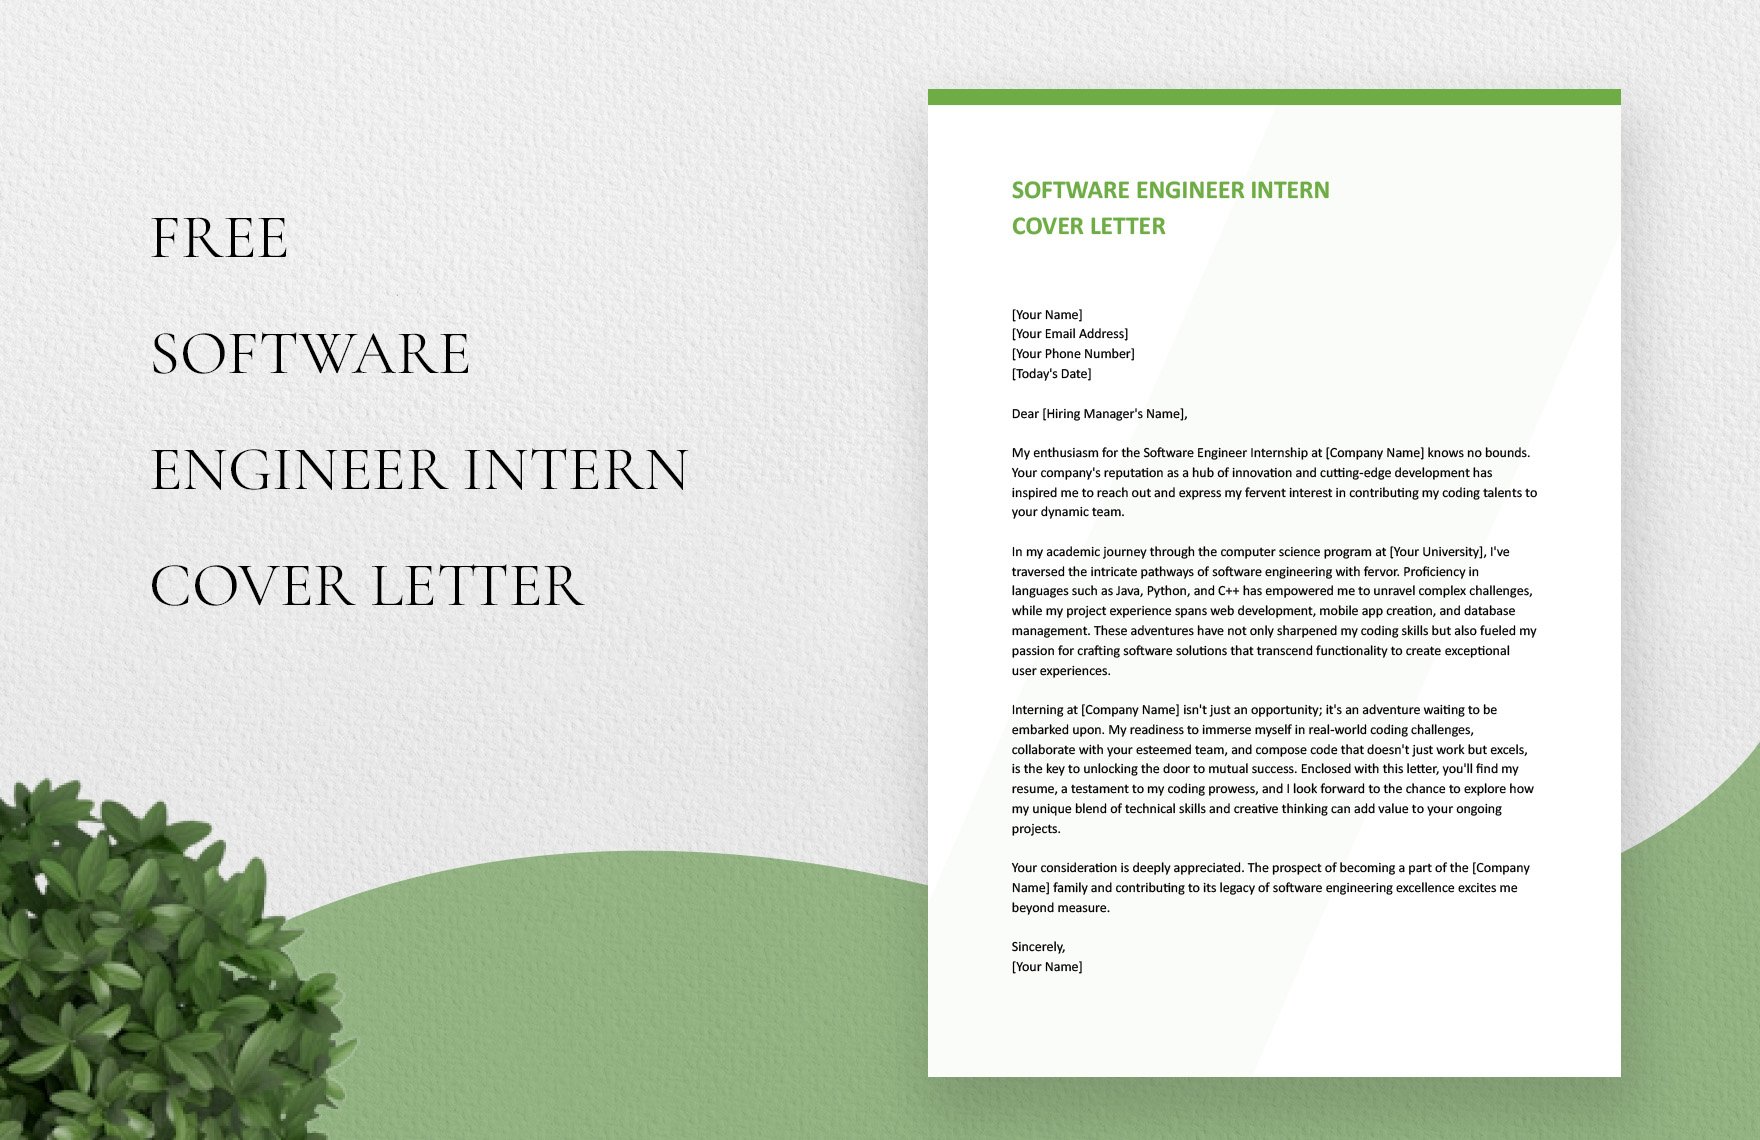 Software Engineer Intern Cover Letter